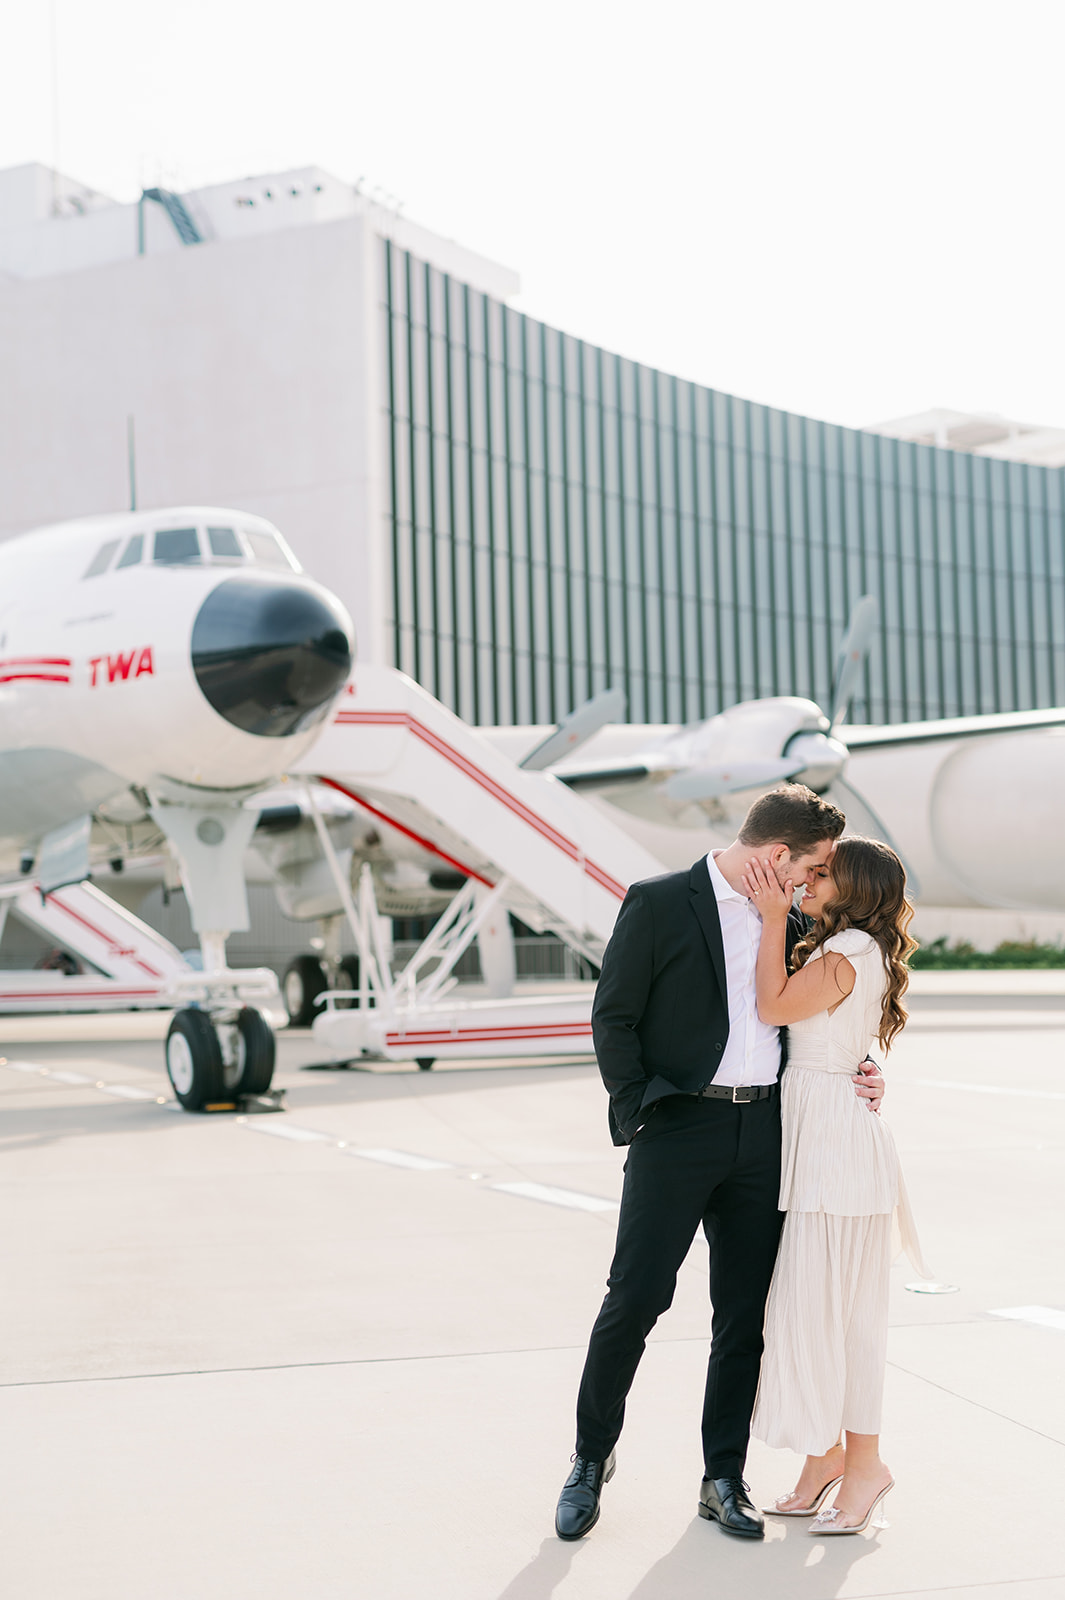 Stylish couple kissing on the tarmac of the TWA Hotel at JFK airport with the Connie Aircraft in the background.